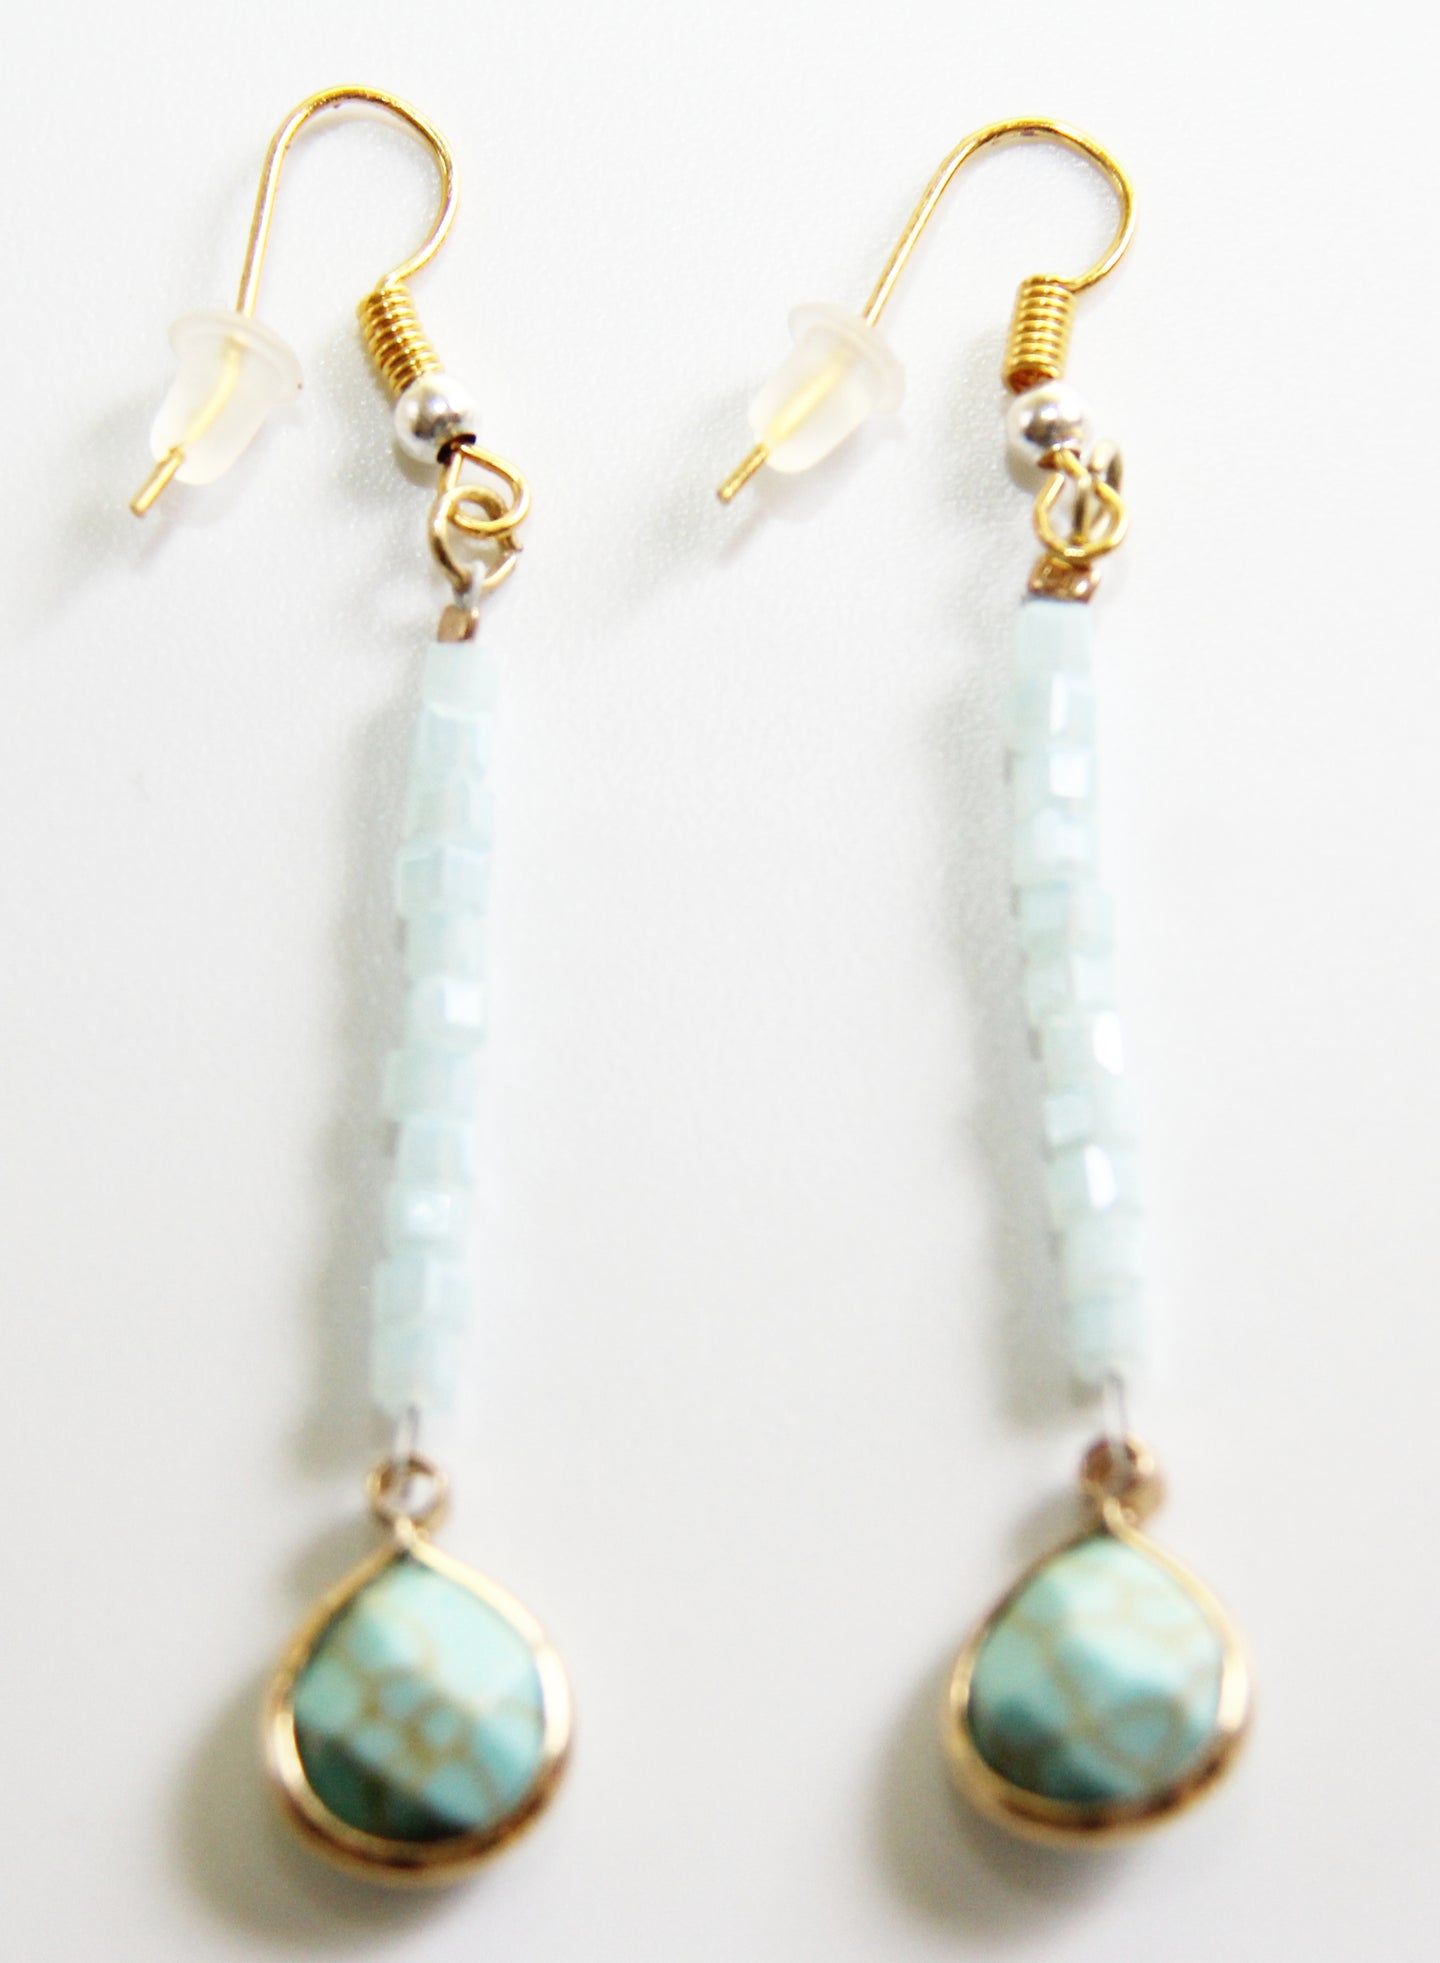 Tear Drop Turquoise Magnesite faceted Stone  At Tip of Lt Blue Glass Stones Earrings